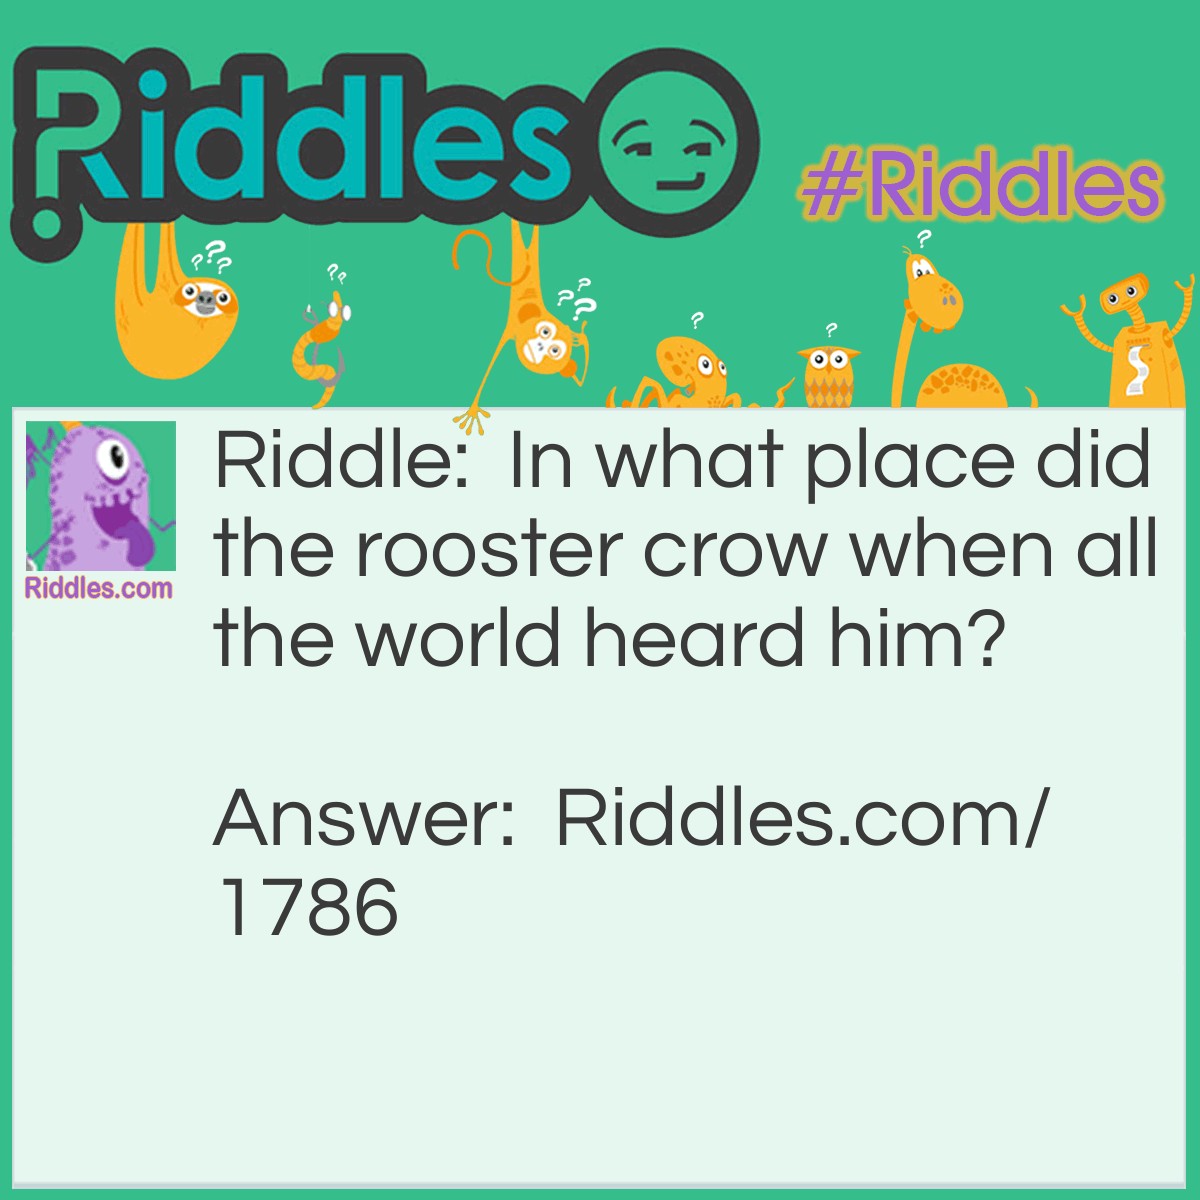 Riddle: In what place did the rooster crow when all the world heard him? Answer: In Noah's Ark.